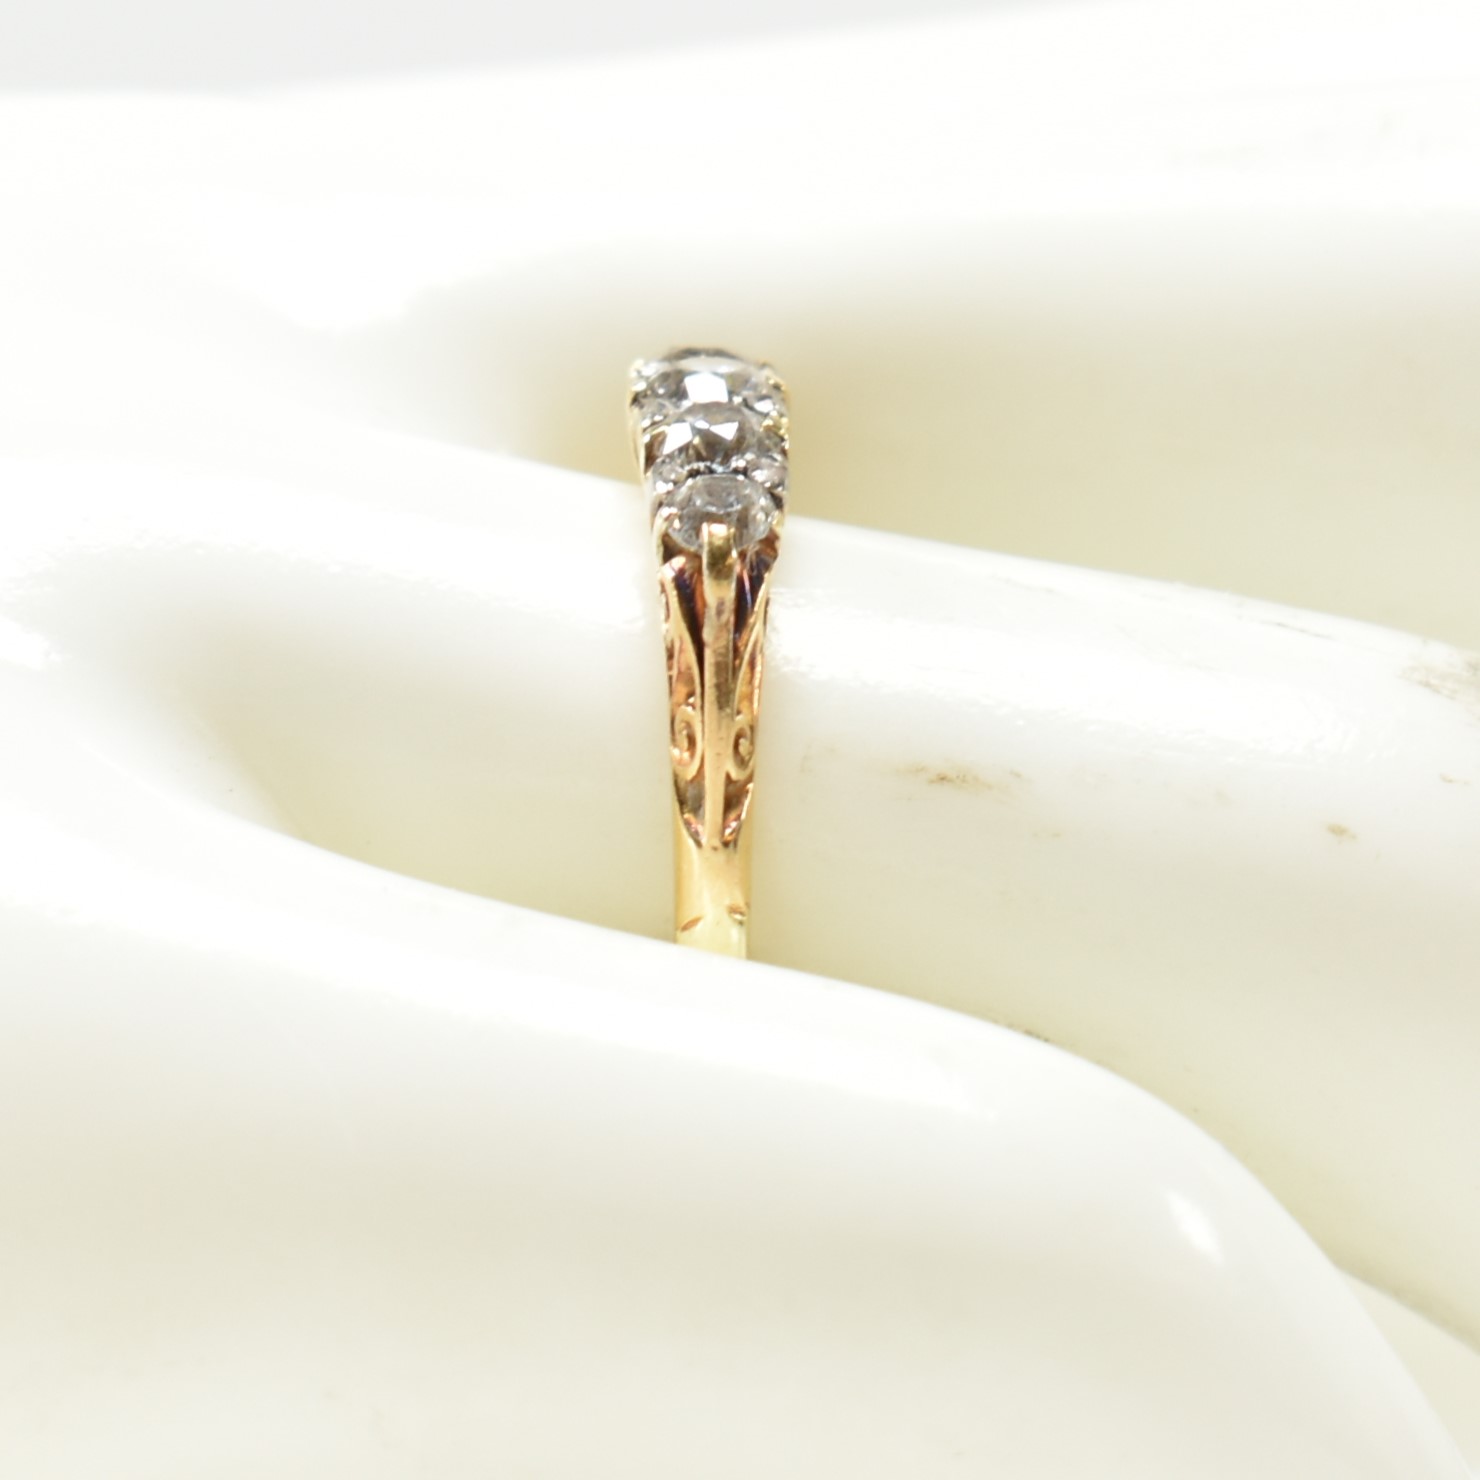 18CT GOLD & DIAMOND FIVE STONE RING - Image 8 of 8